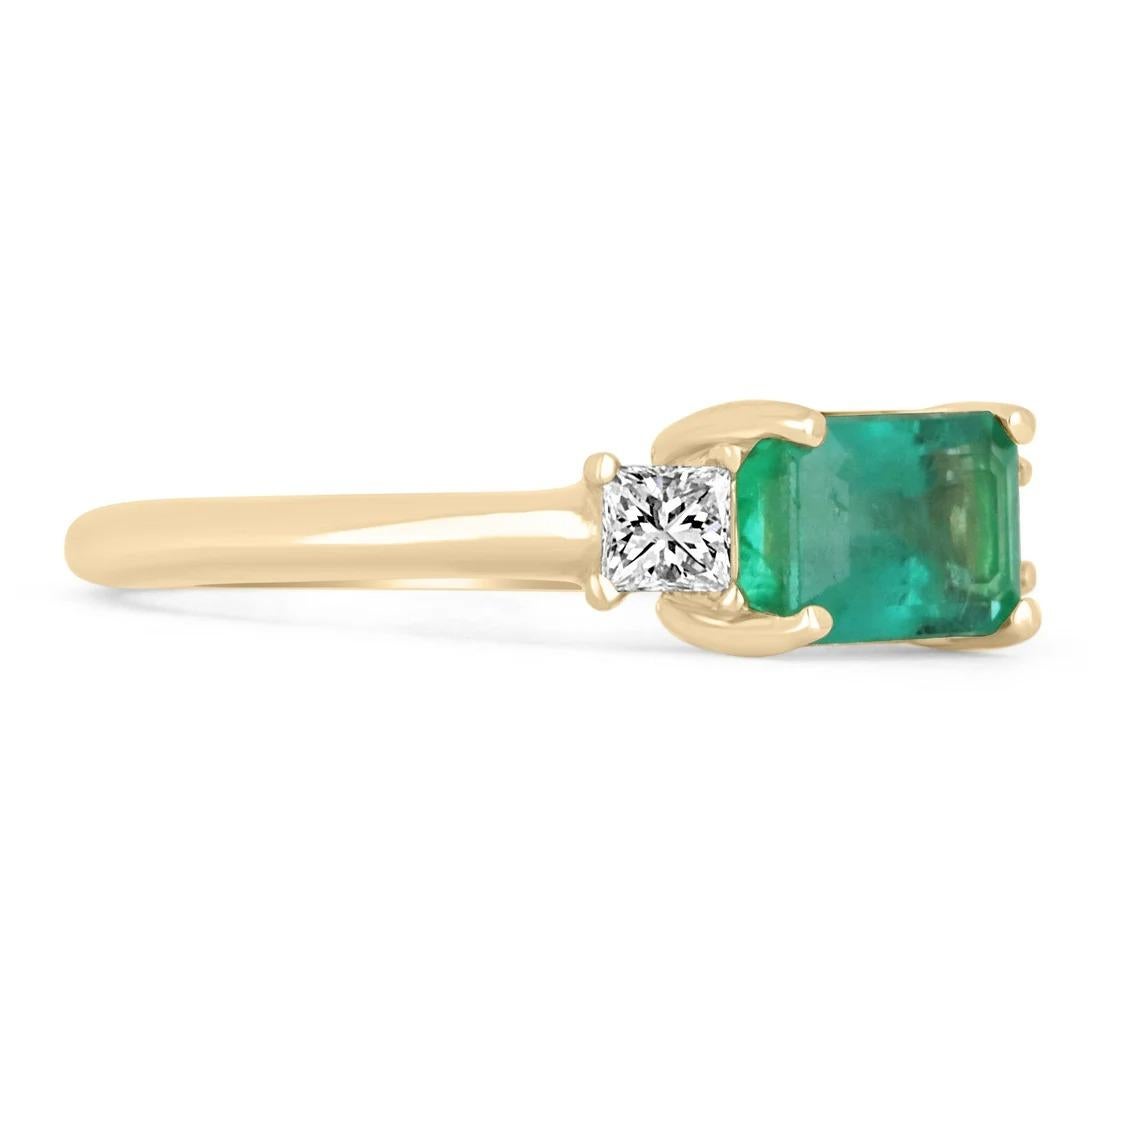 Shower her with love with this emerald and diamond three-stone ring. The center stone carries a full 1.40-carat, natural emerald originating from Zambia set east to west. The stone showcases a gorgeous green color and very good luster overall.